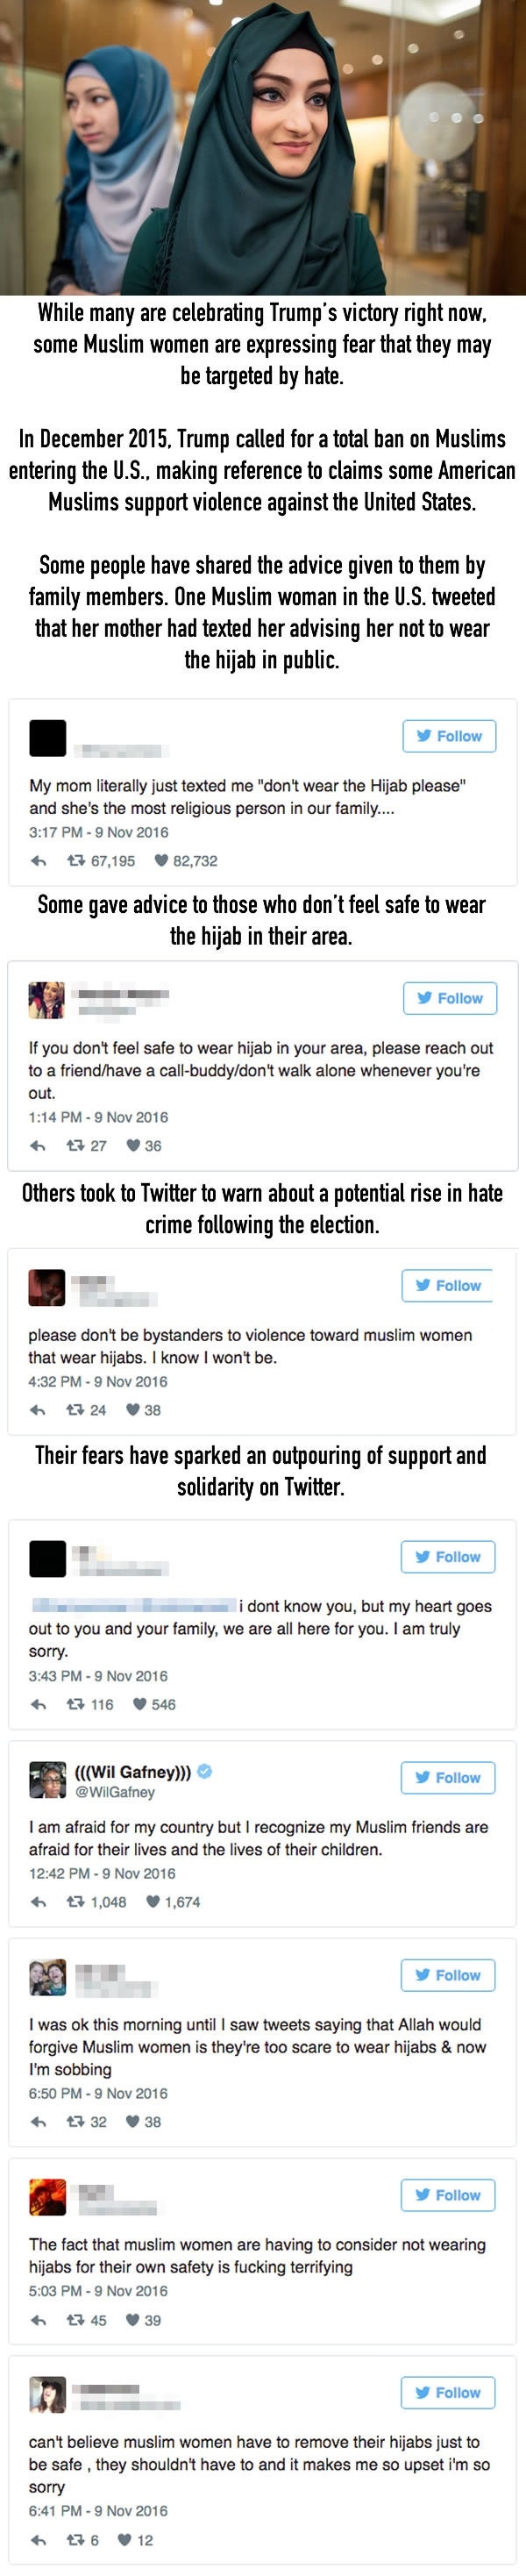 Muslim women are scared to wear the hijab in public after Trump win